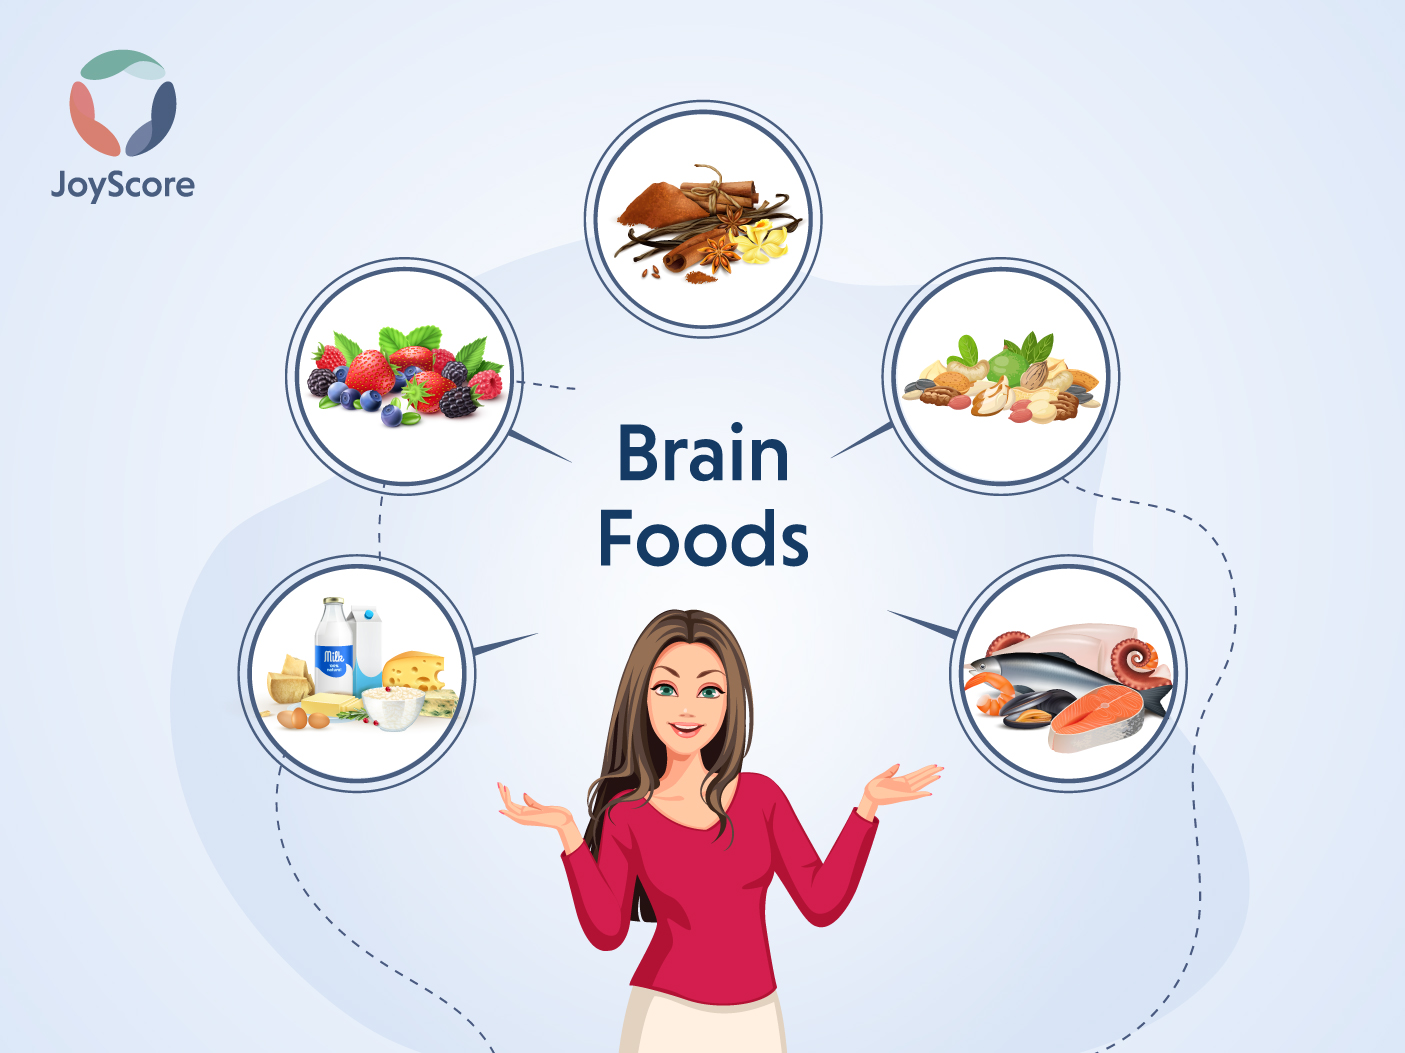 Do you know what are BRAIN FOODS?